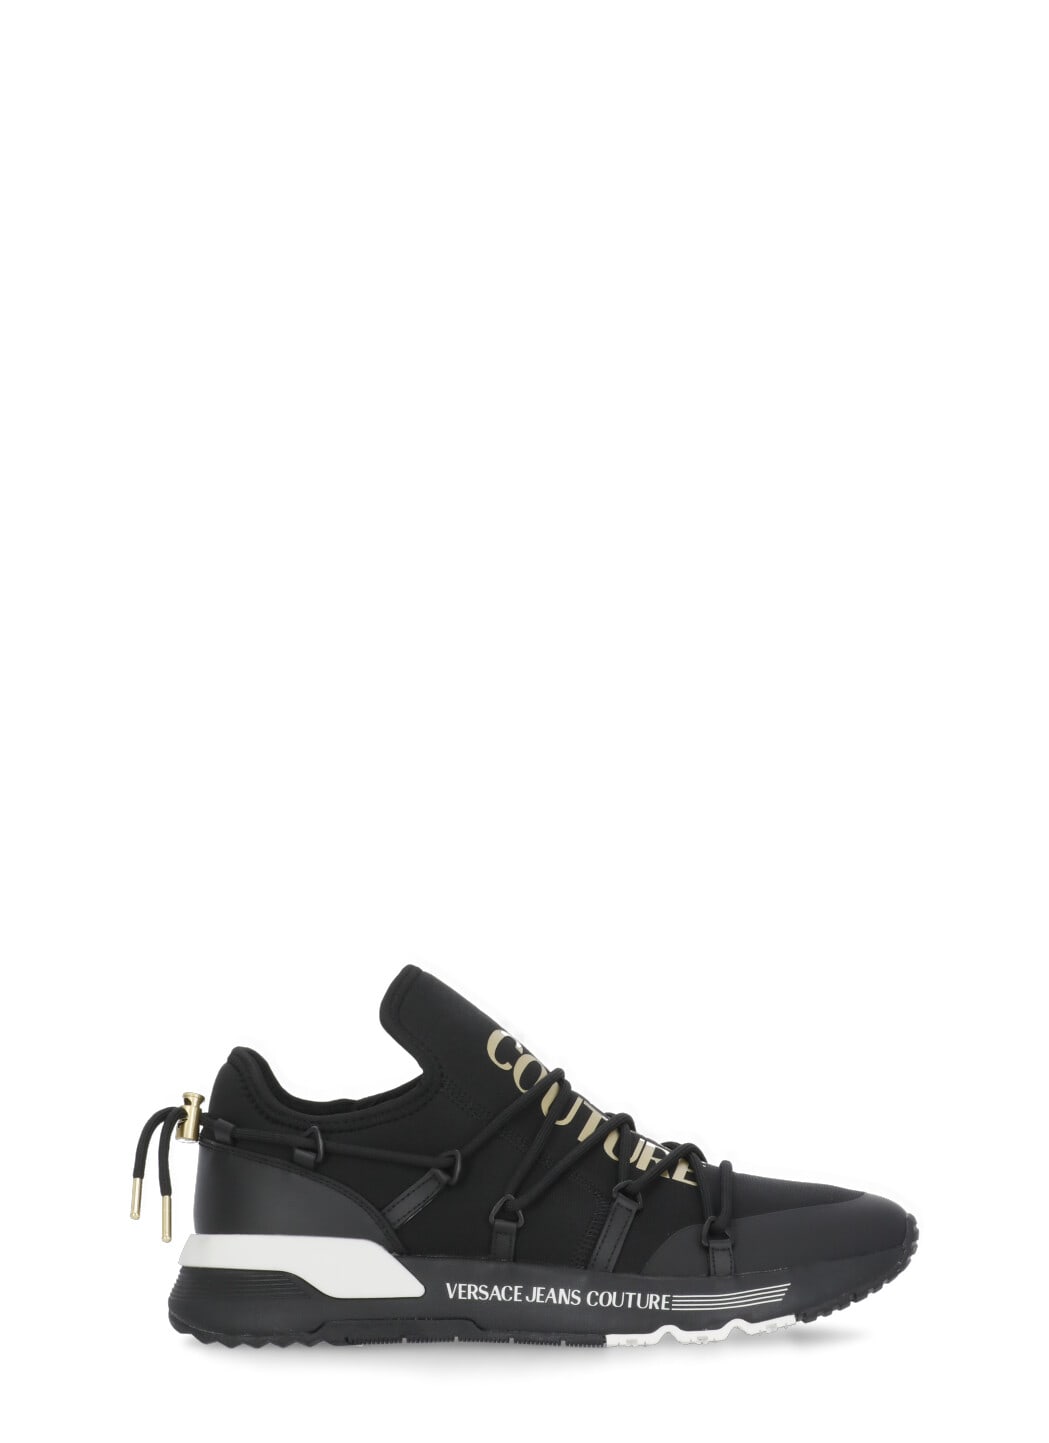 VERSACE JEANS COUTURE DYNAMIC LOW TOP SNEAKERS